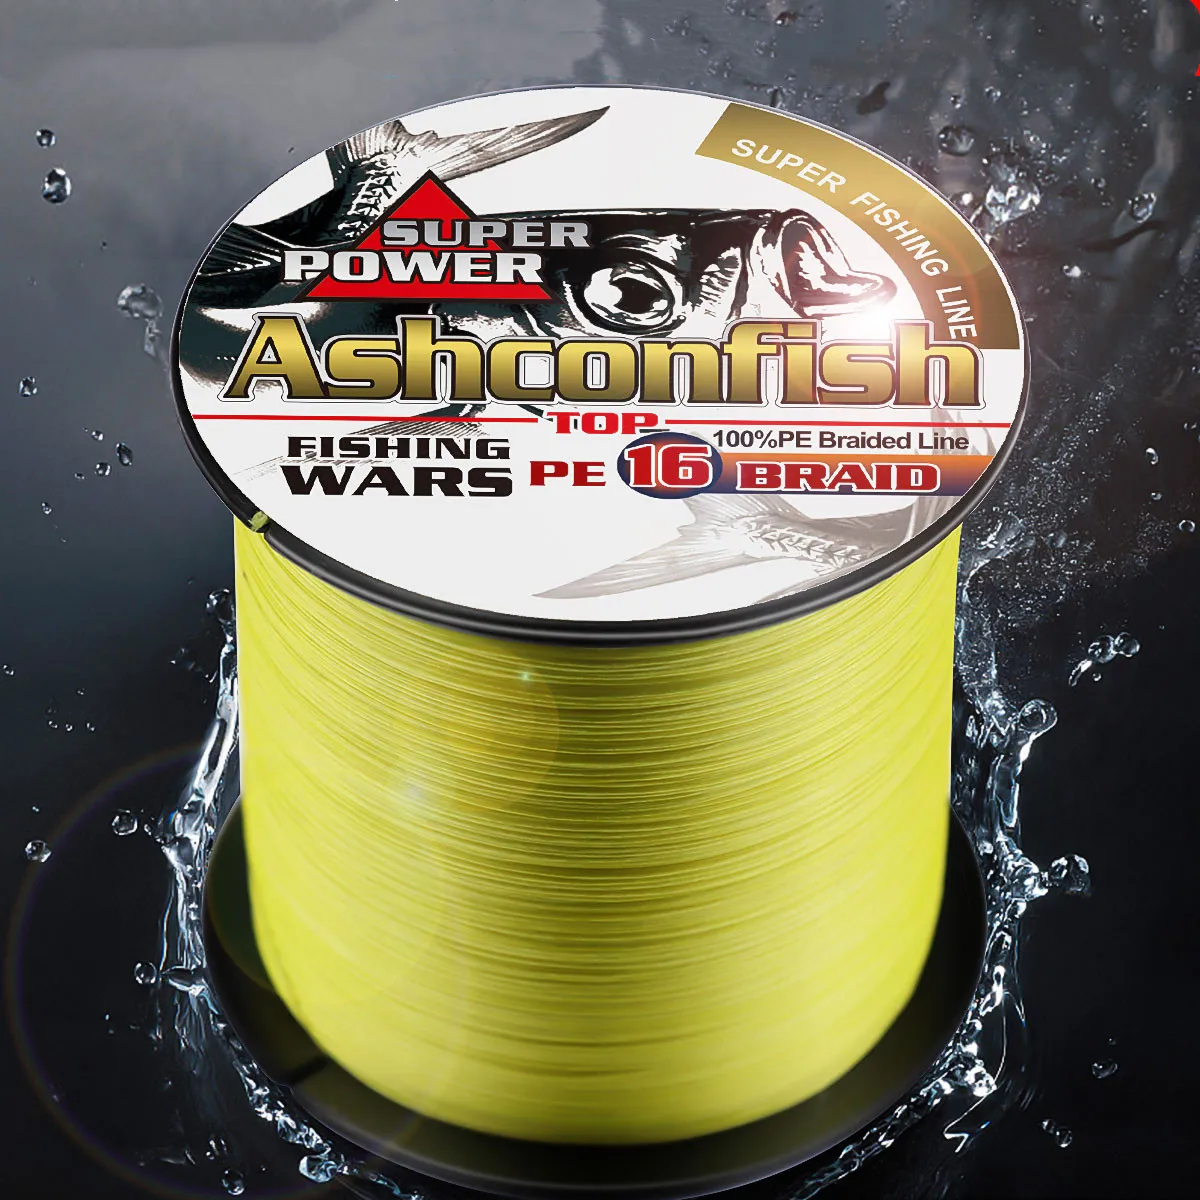 

Hollow line 20LB-500LB Hollowcore 16 strands 100% PE braided fishing line for deep-sea fish, 15 color available